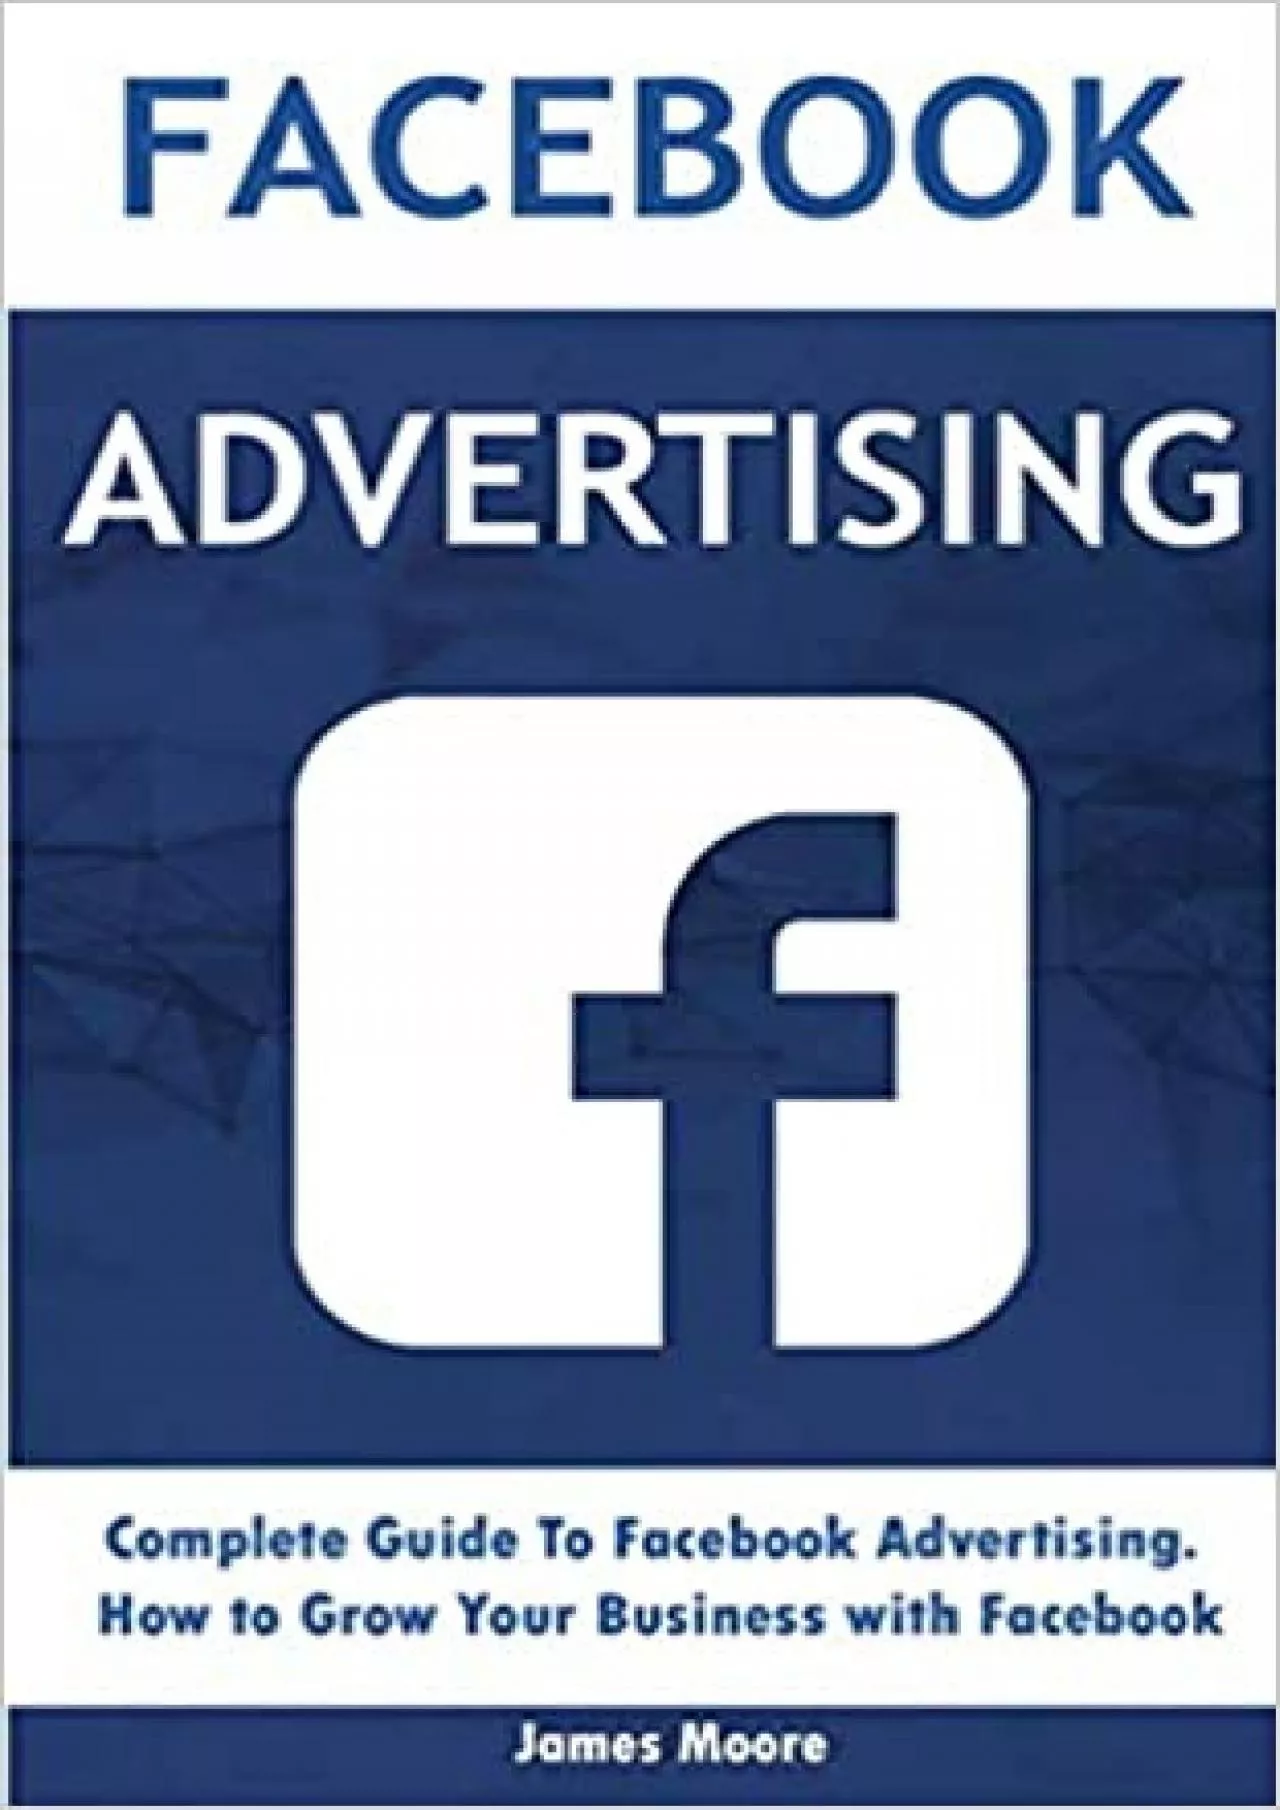 Facebook Advertising: Complete Guide To Facebook Advertising. How to Grow Your Business